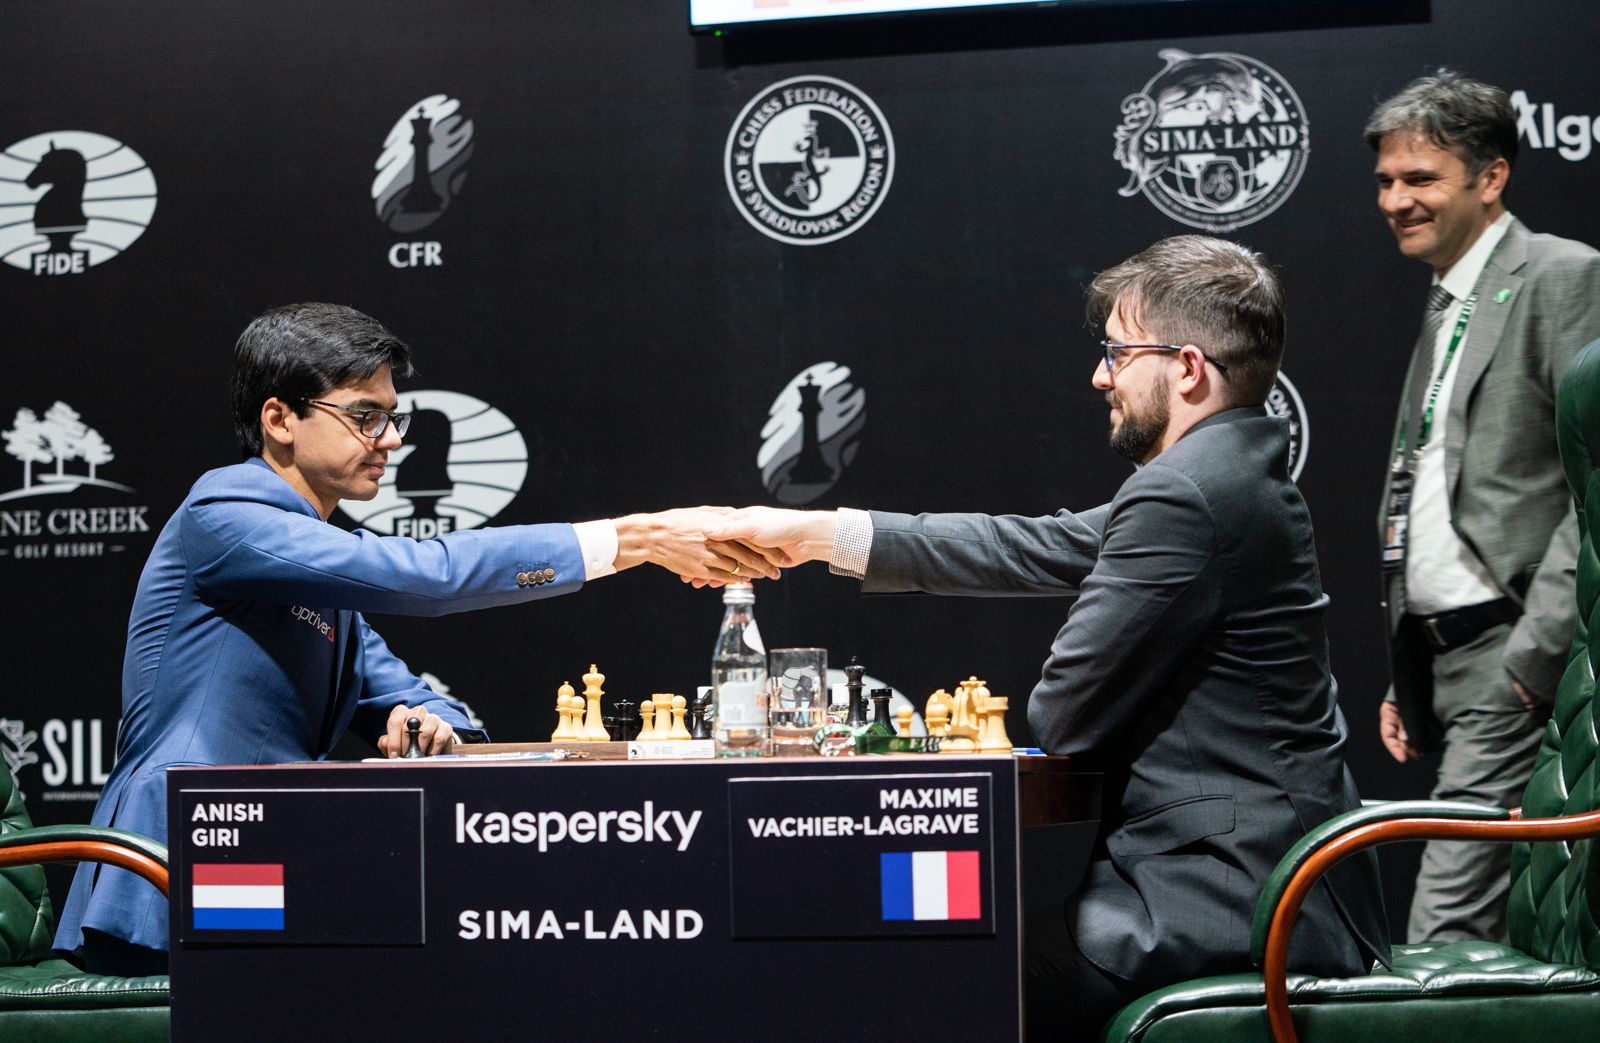 Chesspuzzle.net on X: The 52 best chess puzzles of the year 2020! All  based on tournament games played in 2020. Includes puzzles with Carlsen,  Caruana, Nakamura, MVL, Shirov, Svidler, Ding Liren, Nepomniachtchi